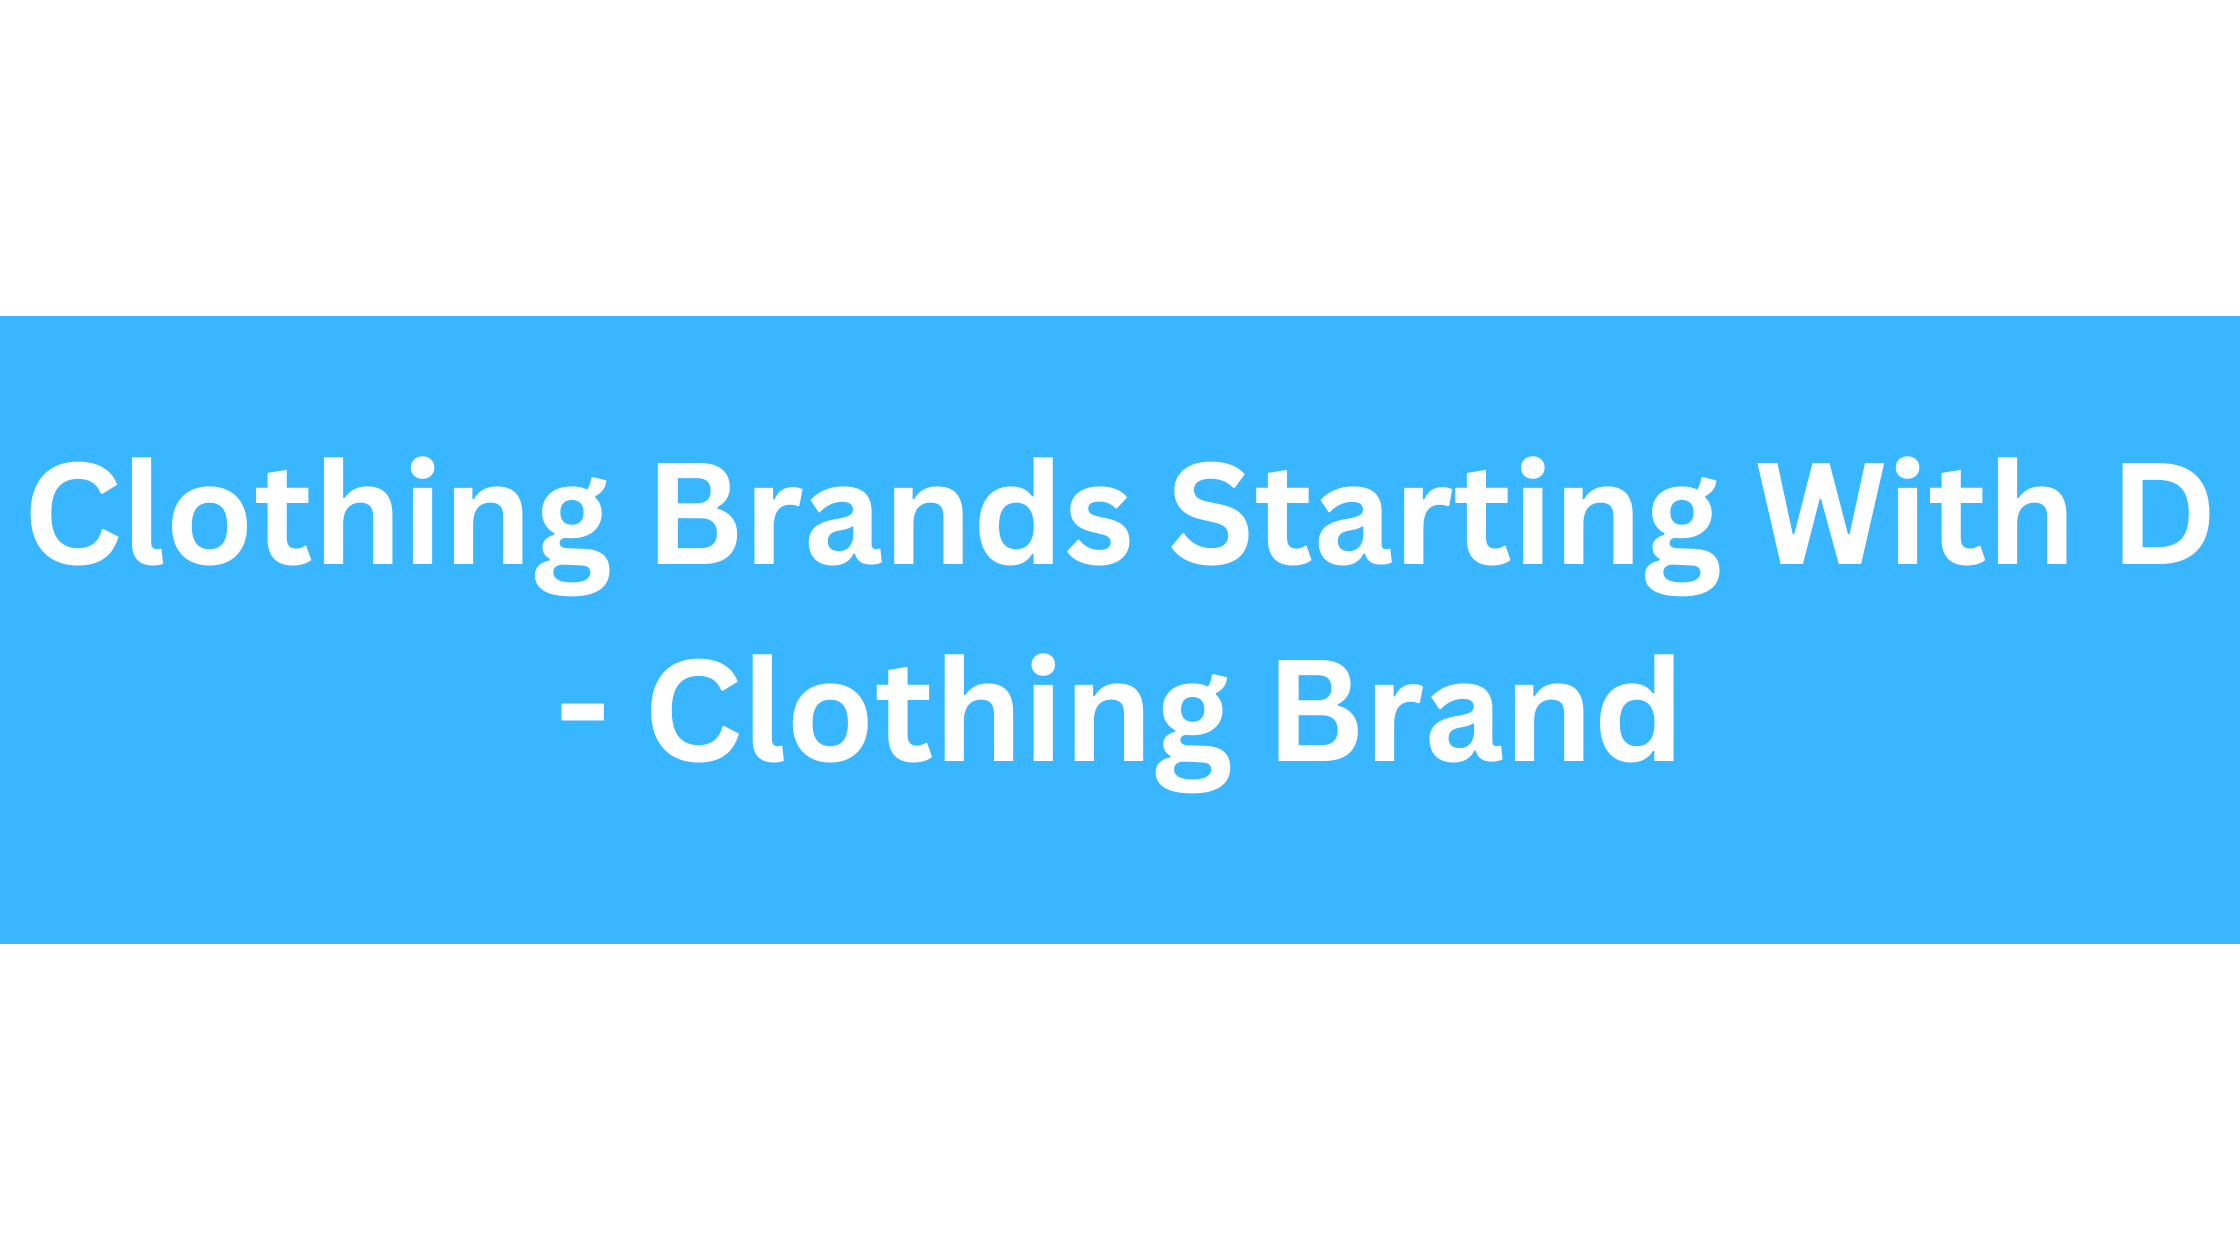 Clothing Brands Starting With D